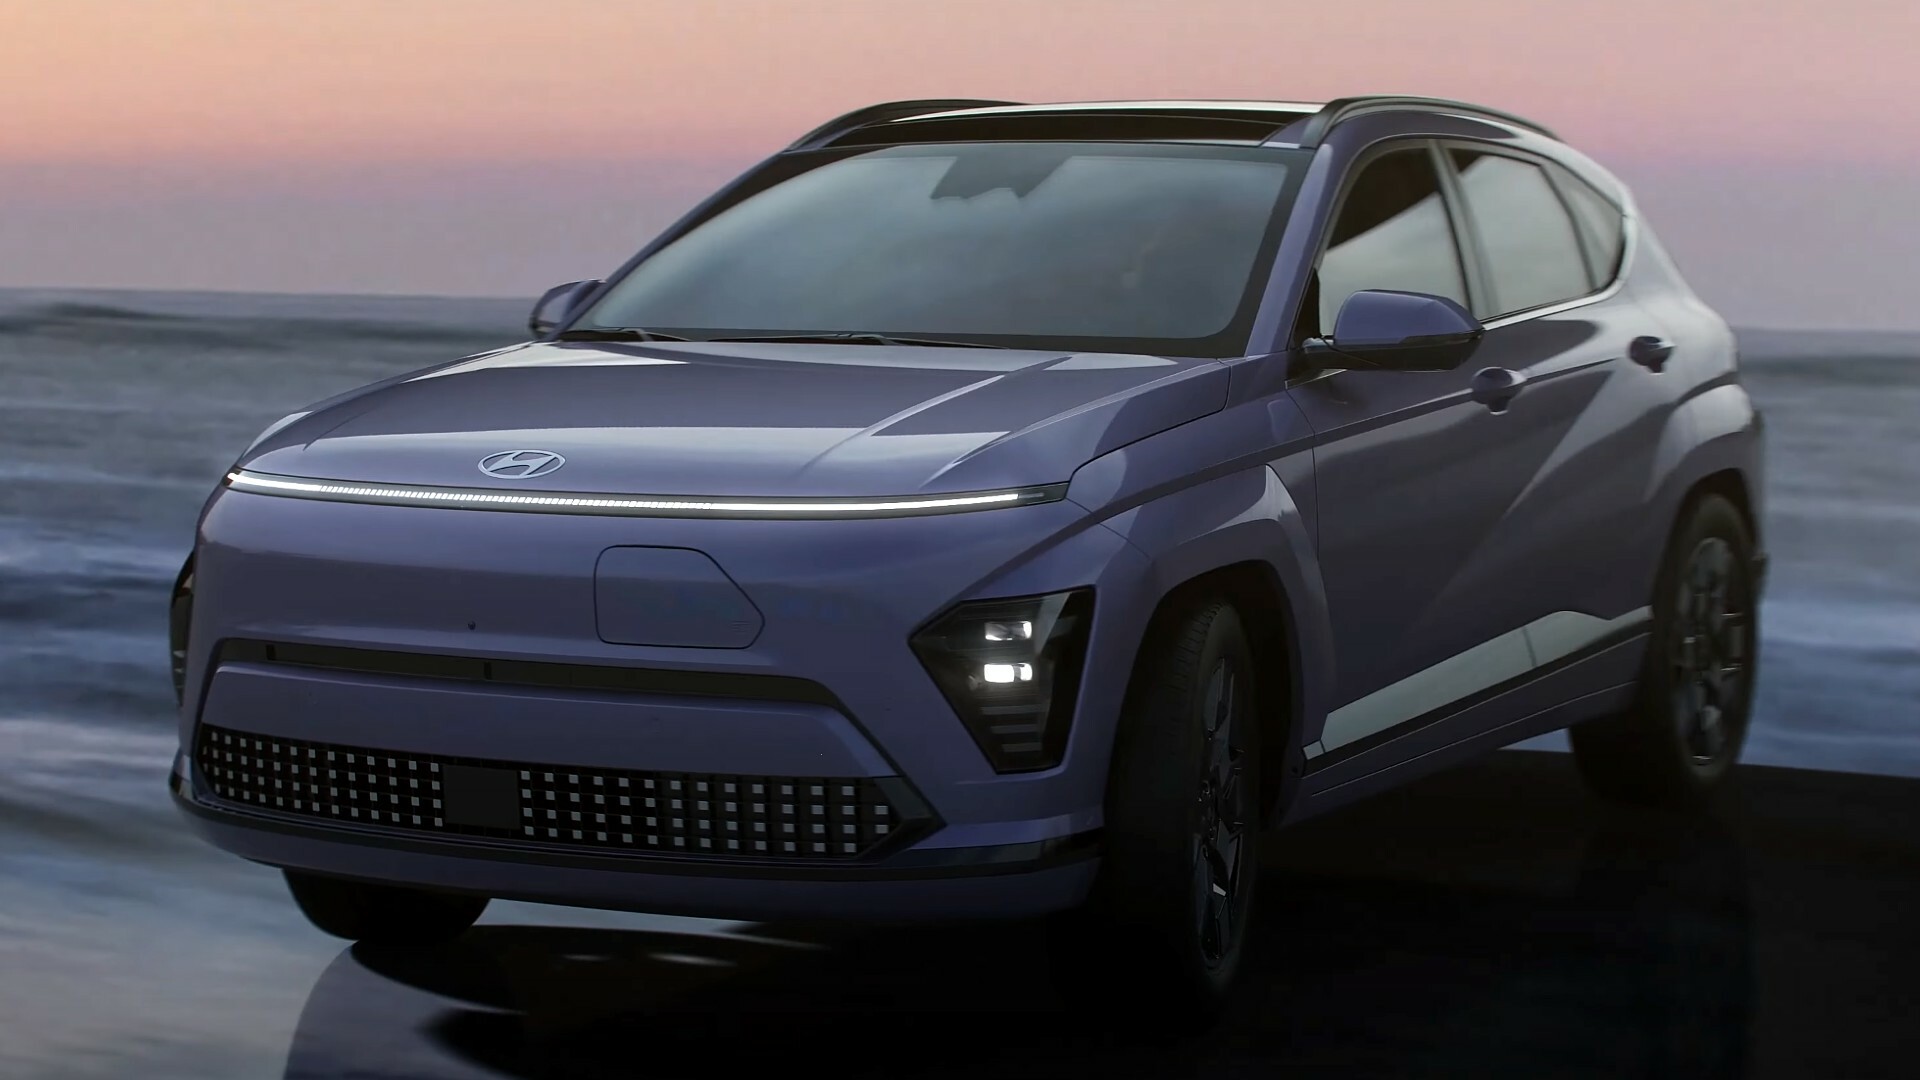 Here’s A Closer Look At The New Hyundai Kona Electric Carscoops